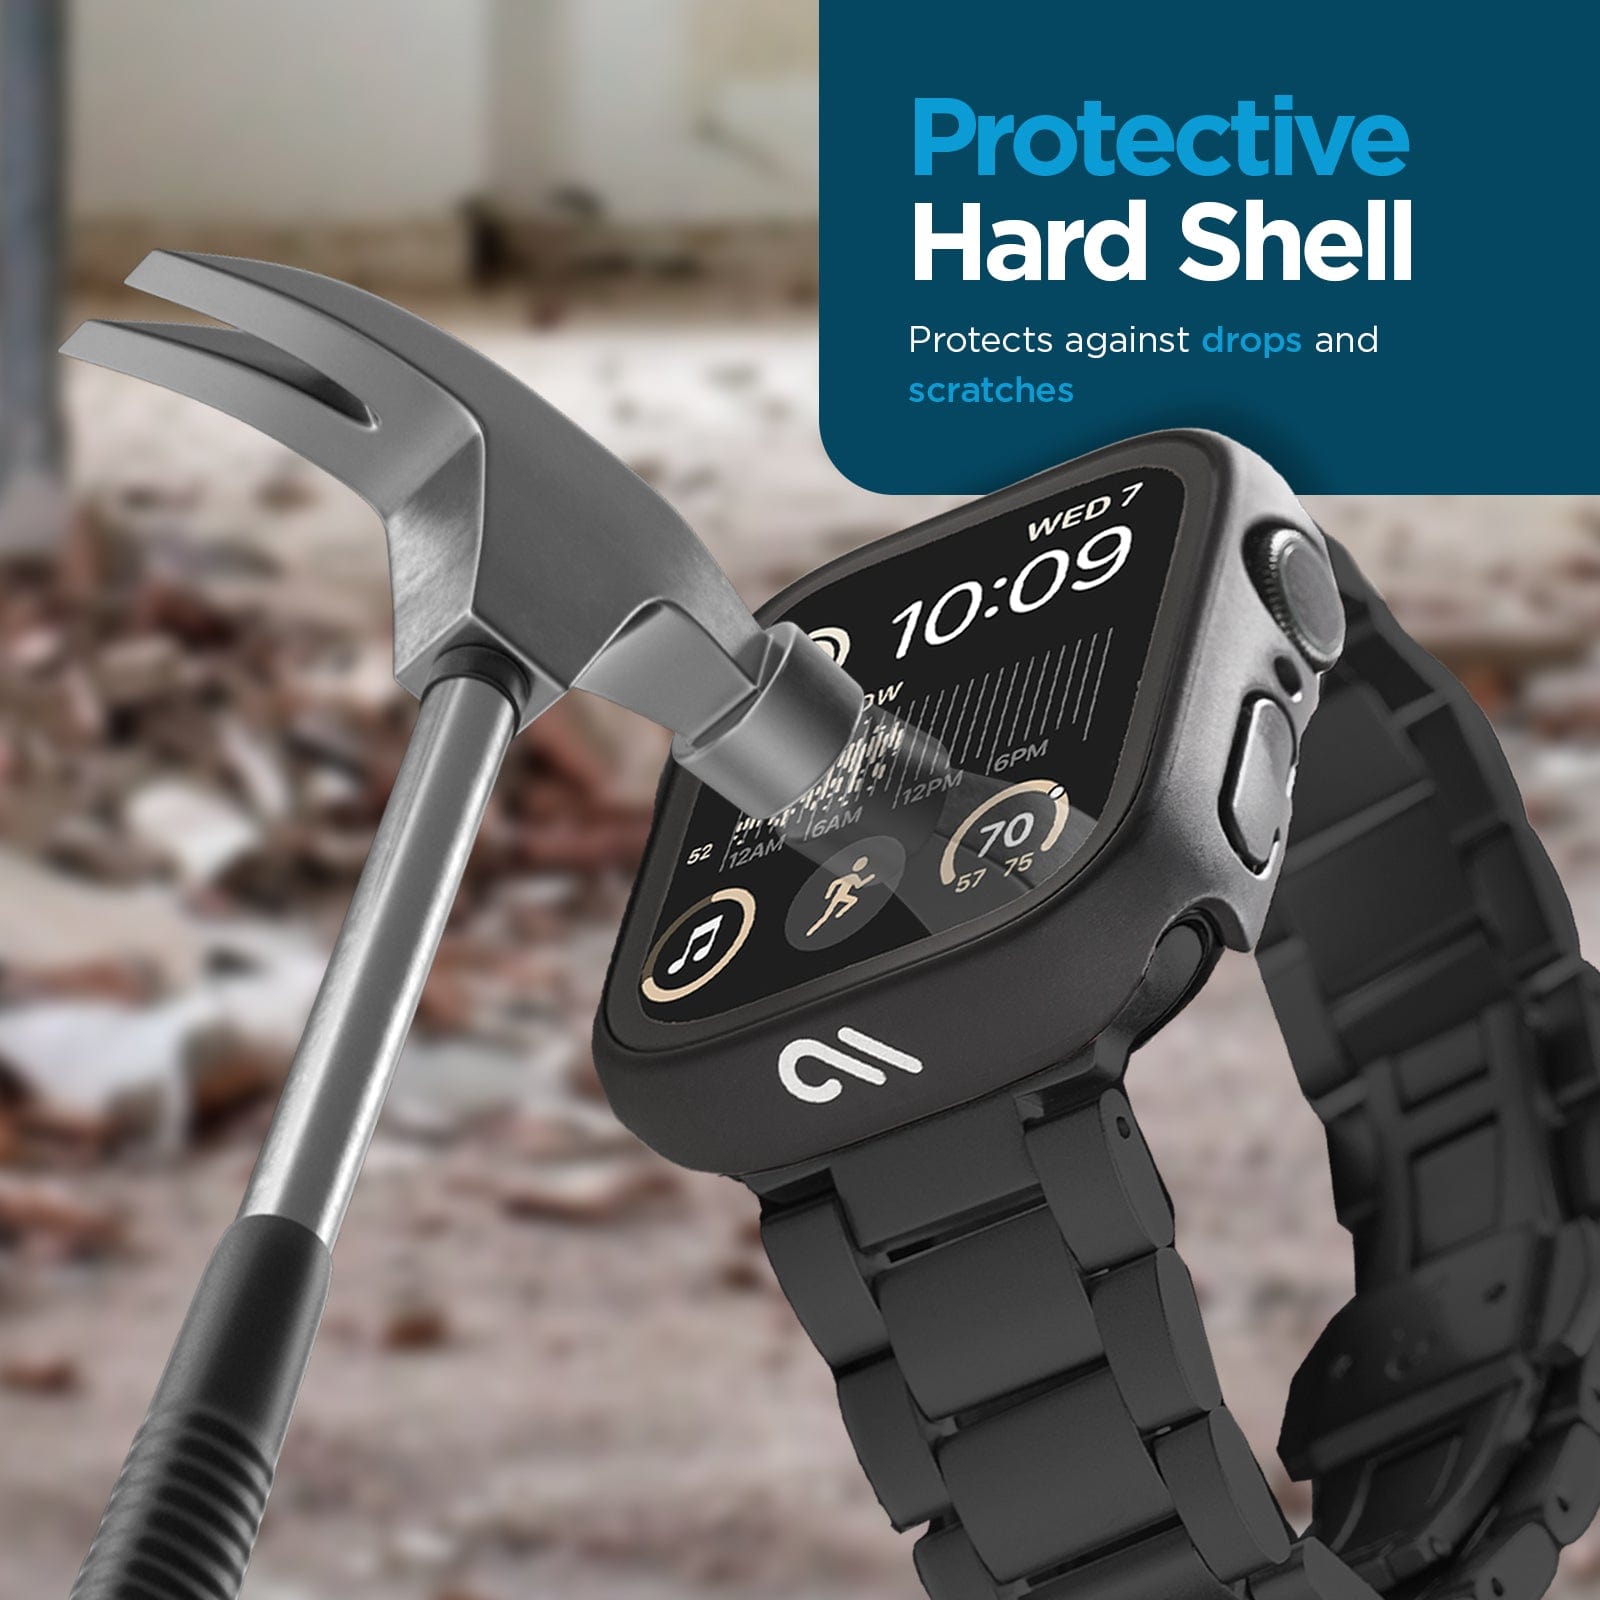 PROTECTIVE HARDSELL PROTECTS AGAINST DROPS AND SCRATCHES